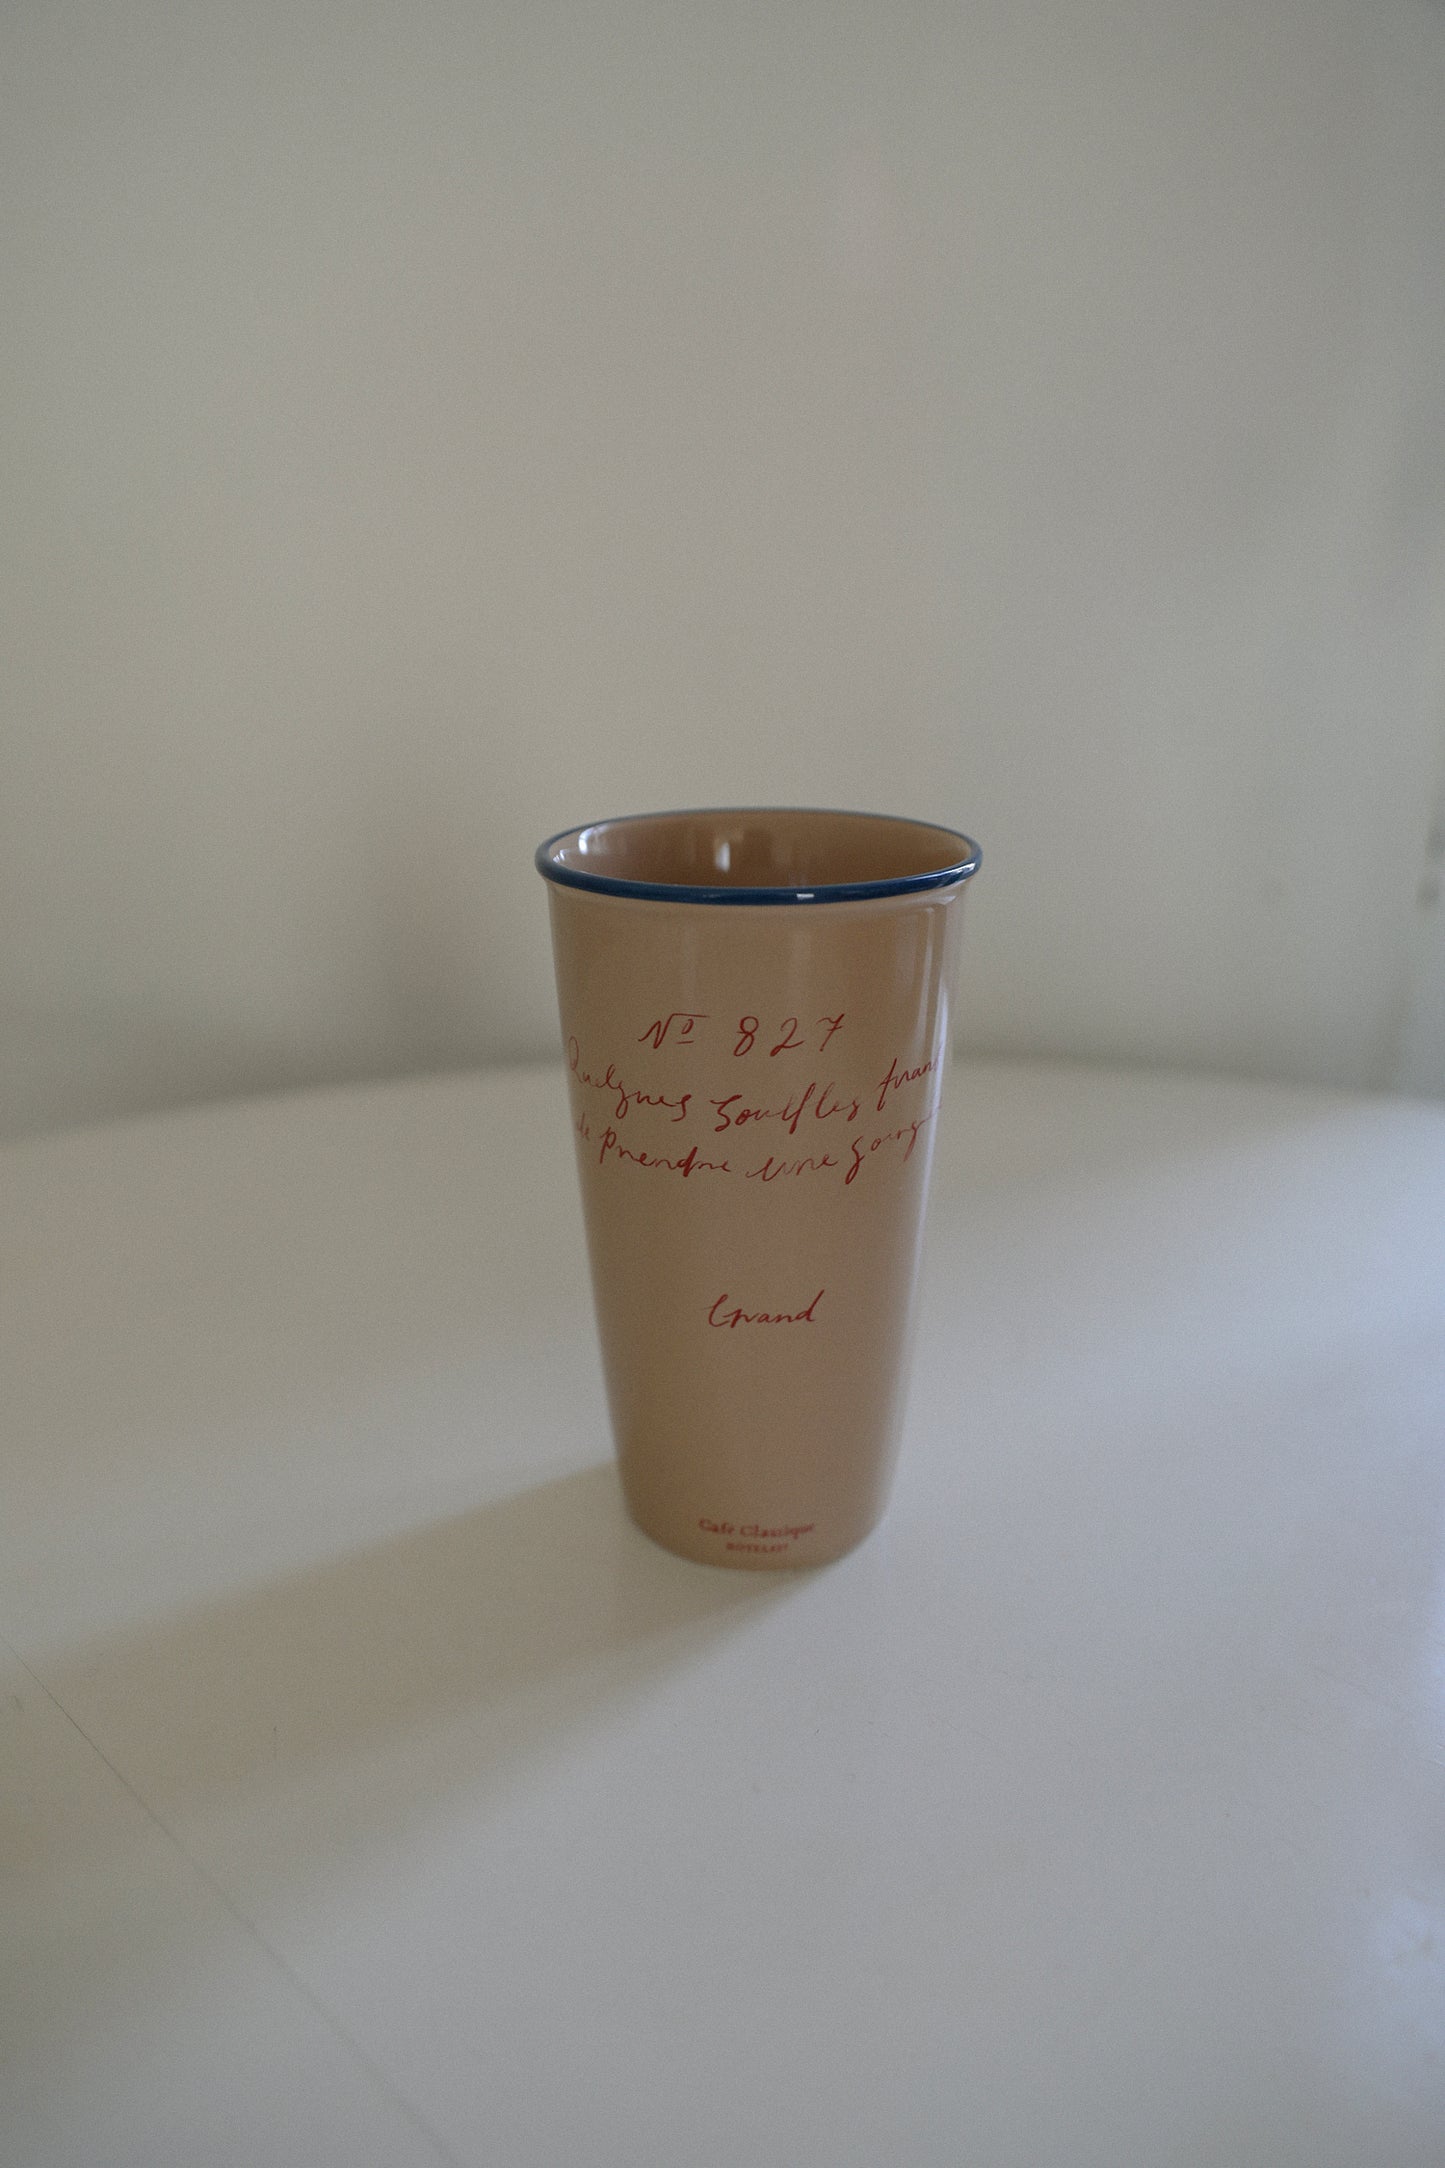 Hotel 827 Grand Paper Cup (Toffee)